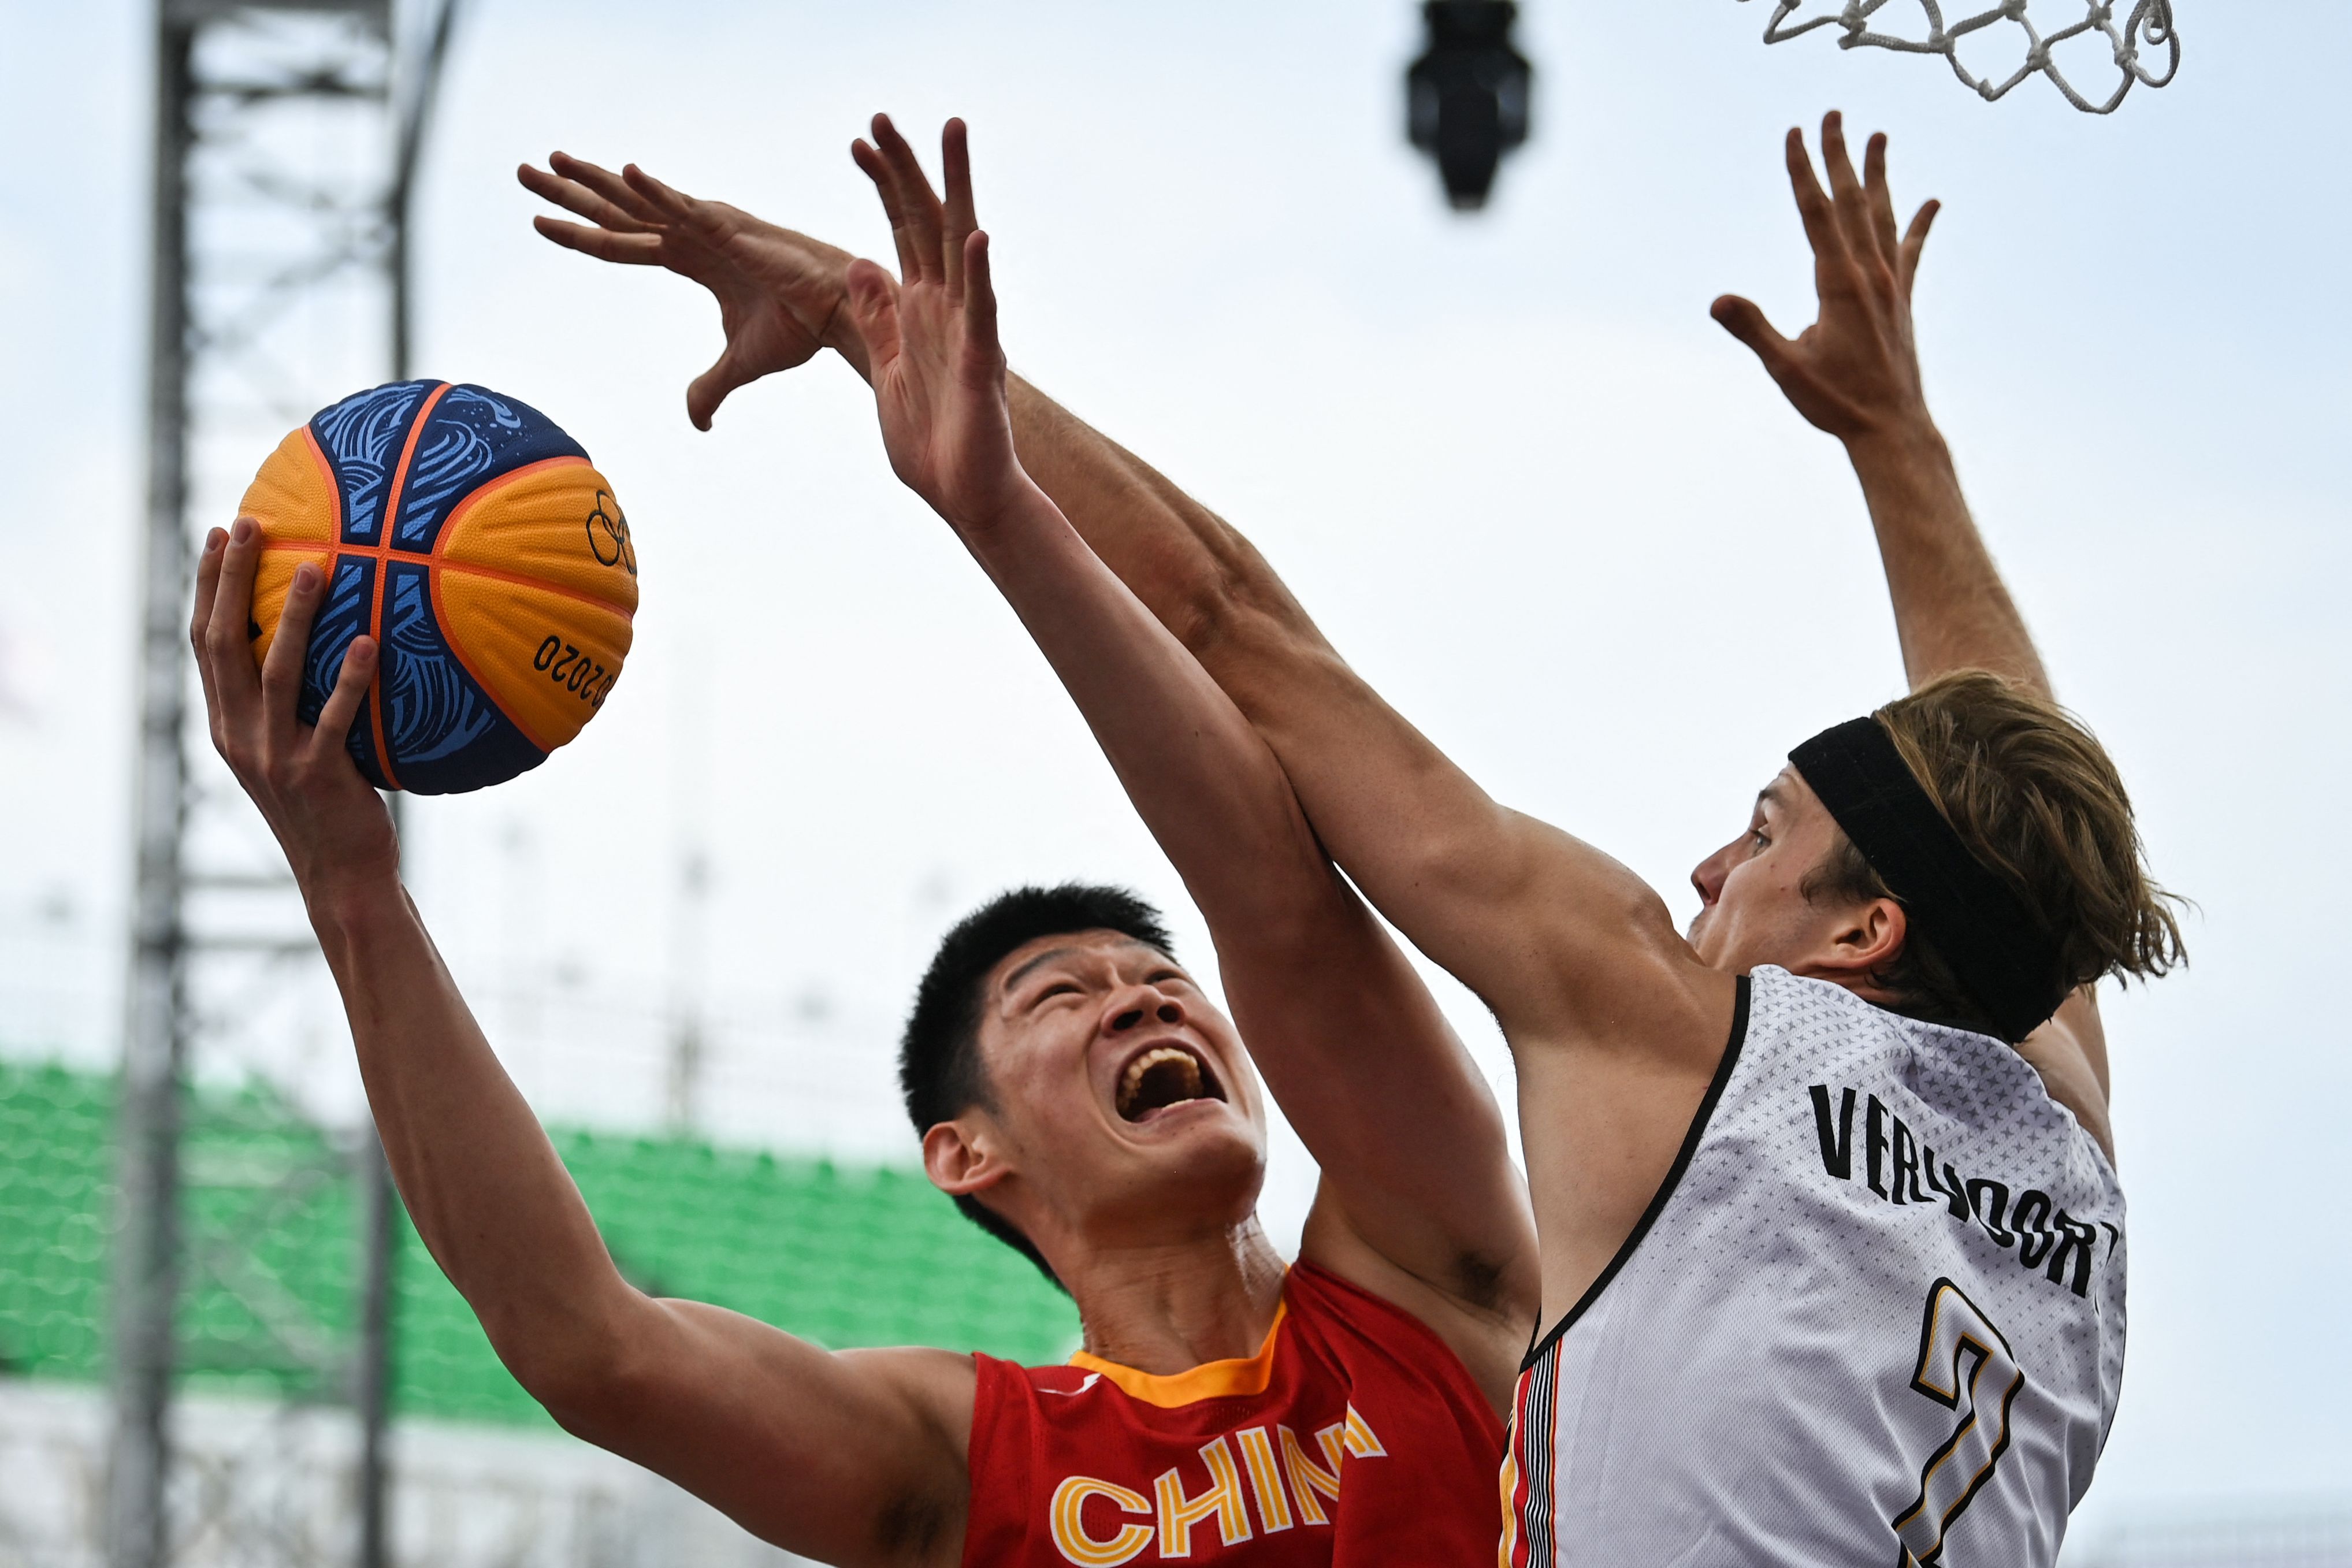 Belgium's Thibaut Vervoort (R) fights for the ball with China's Hu Jinqiu during the men's first round 3x3 basketball match between Belgium and China  in Tokyo, on July 26